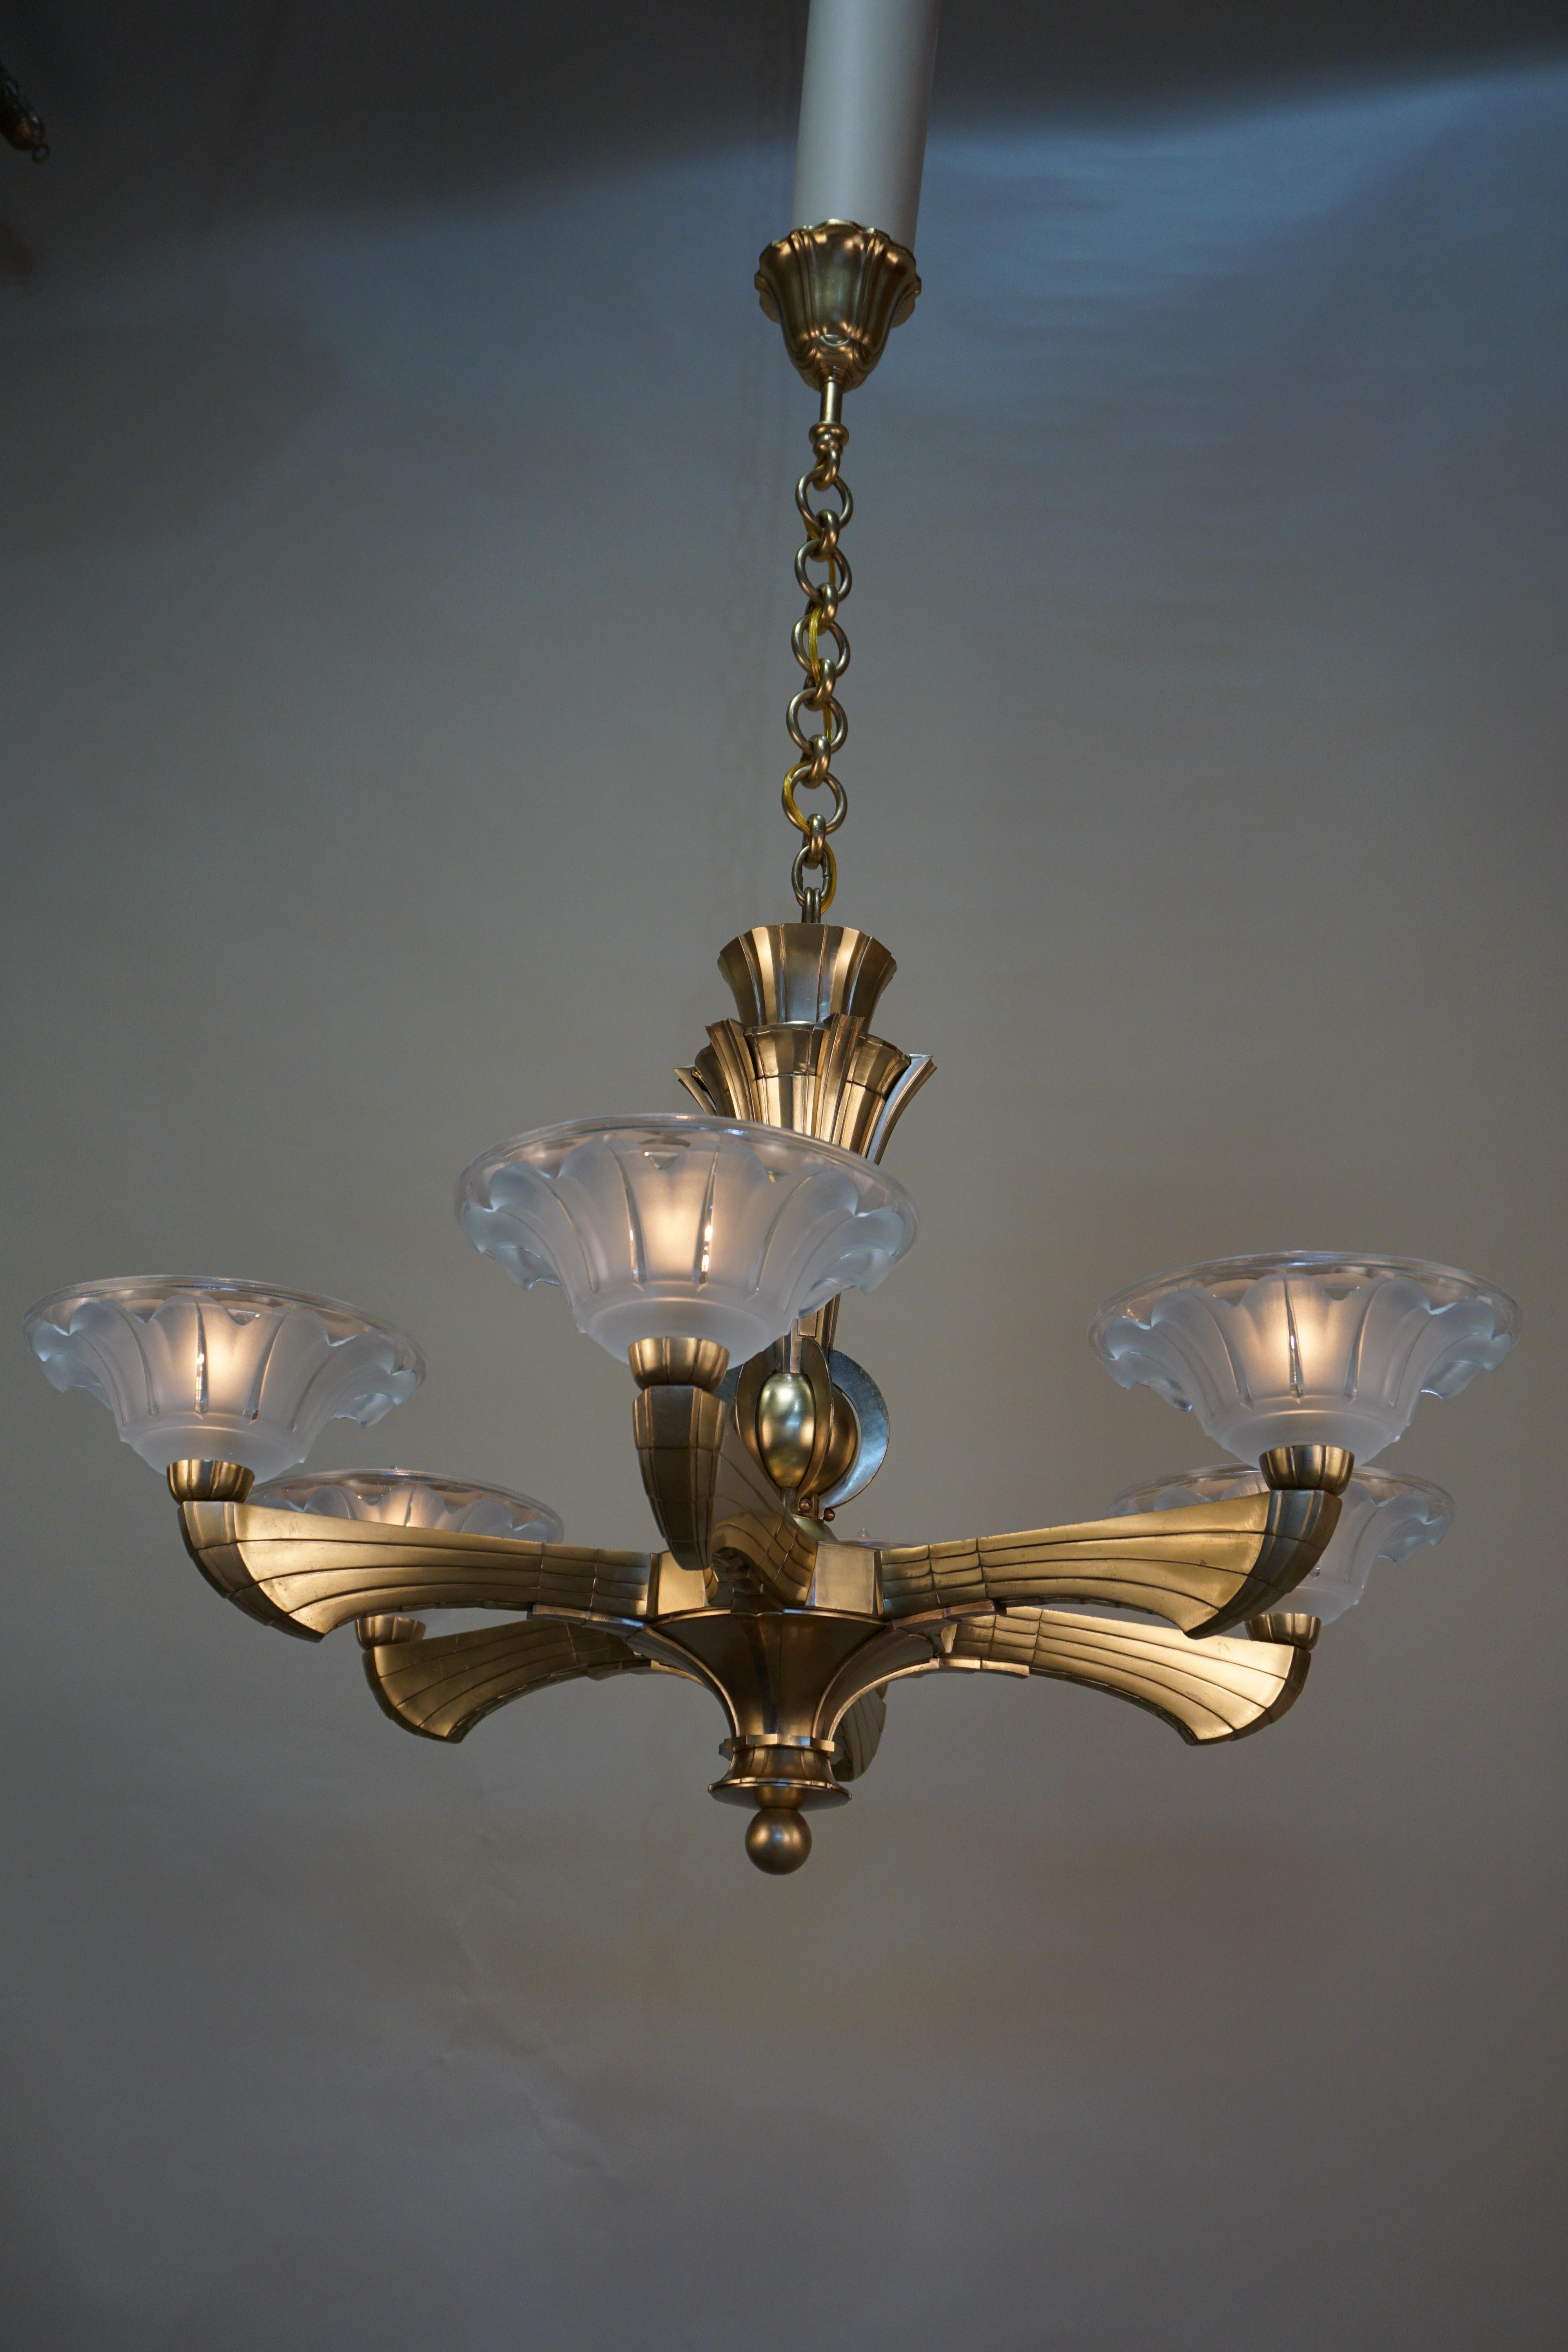 Heavy six-arm cased bronze Art Deco chandelier with clear frost glass shades.
This chandelier has 46